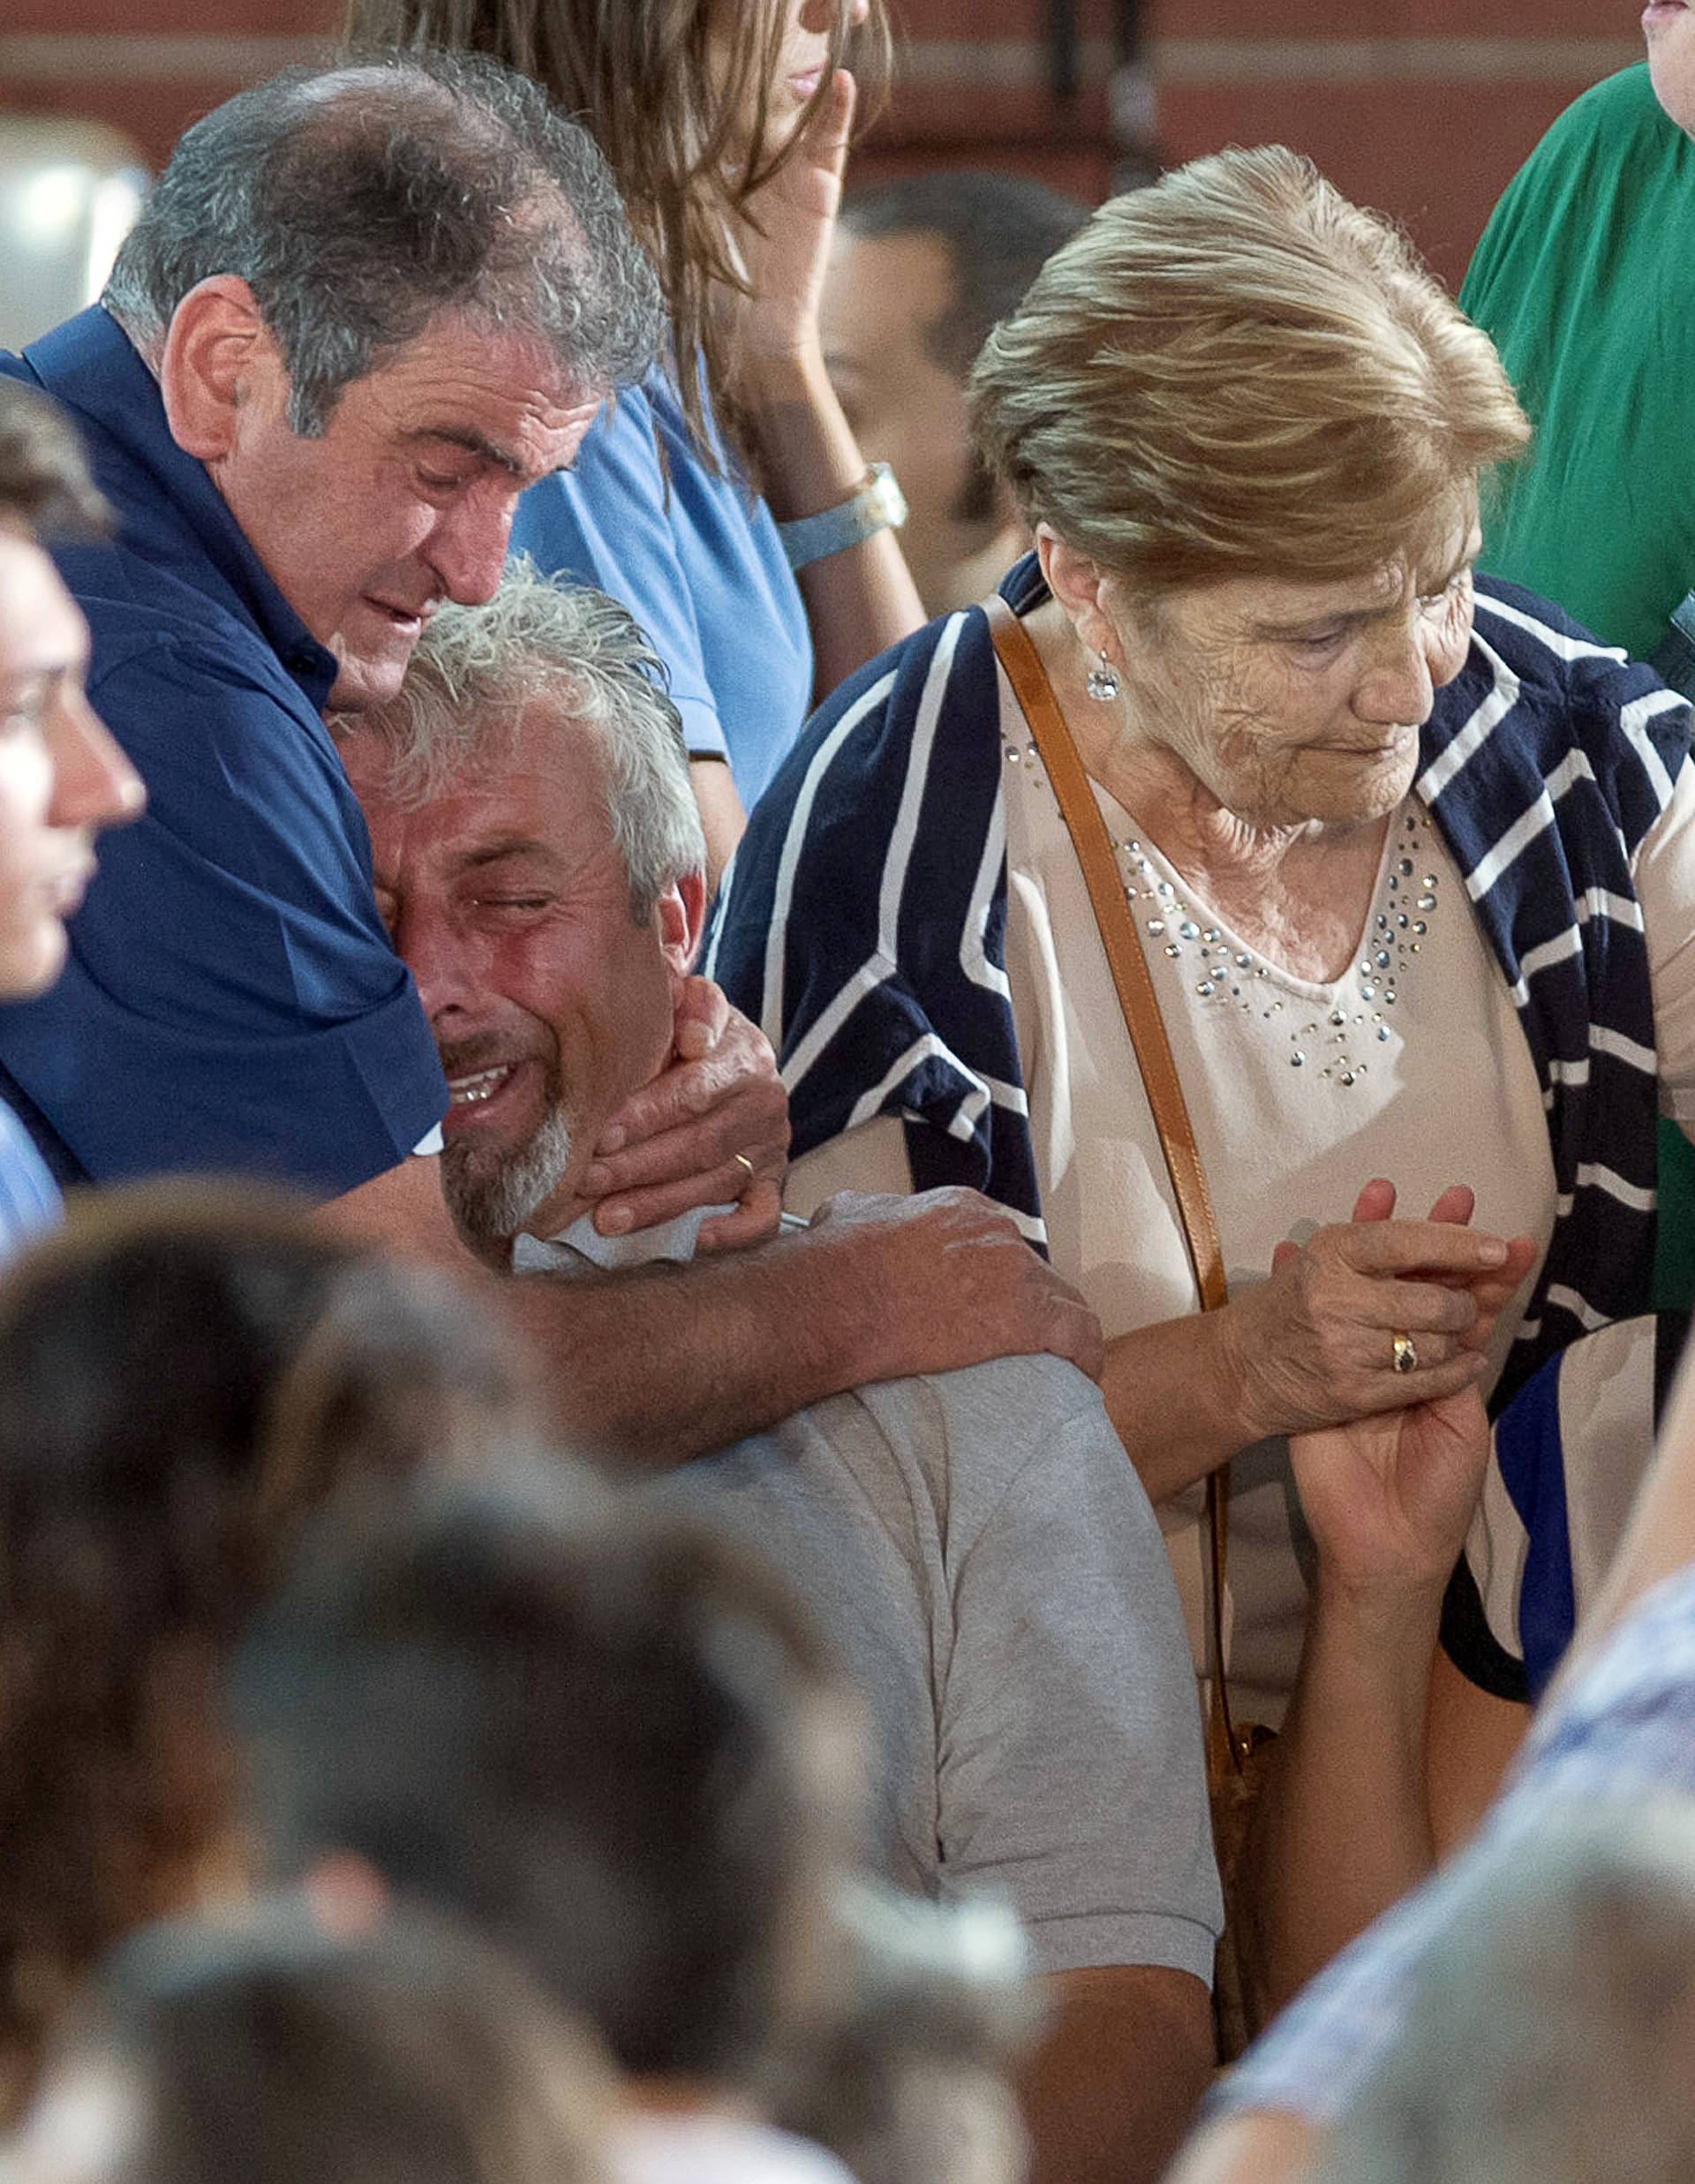 A man cries after a funeral service for victims of the earthquake inside a gym in Ascoli Piceno, Italy